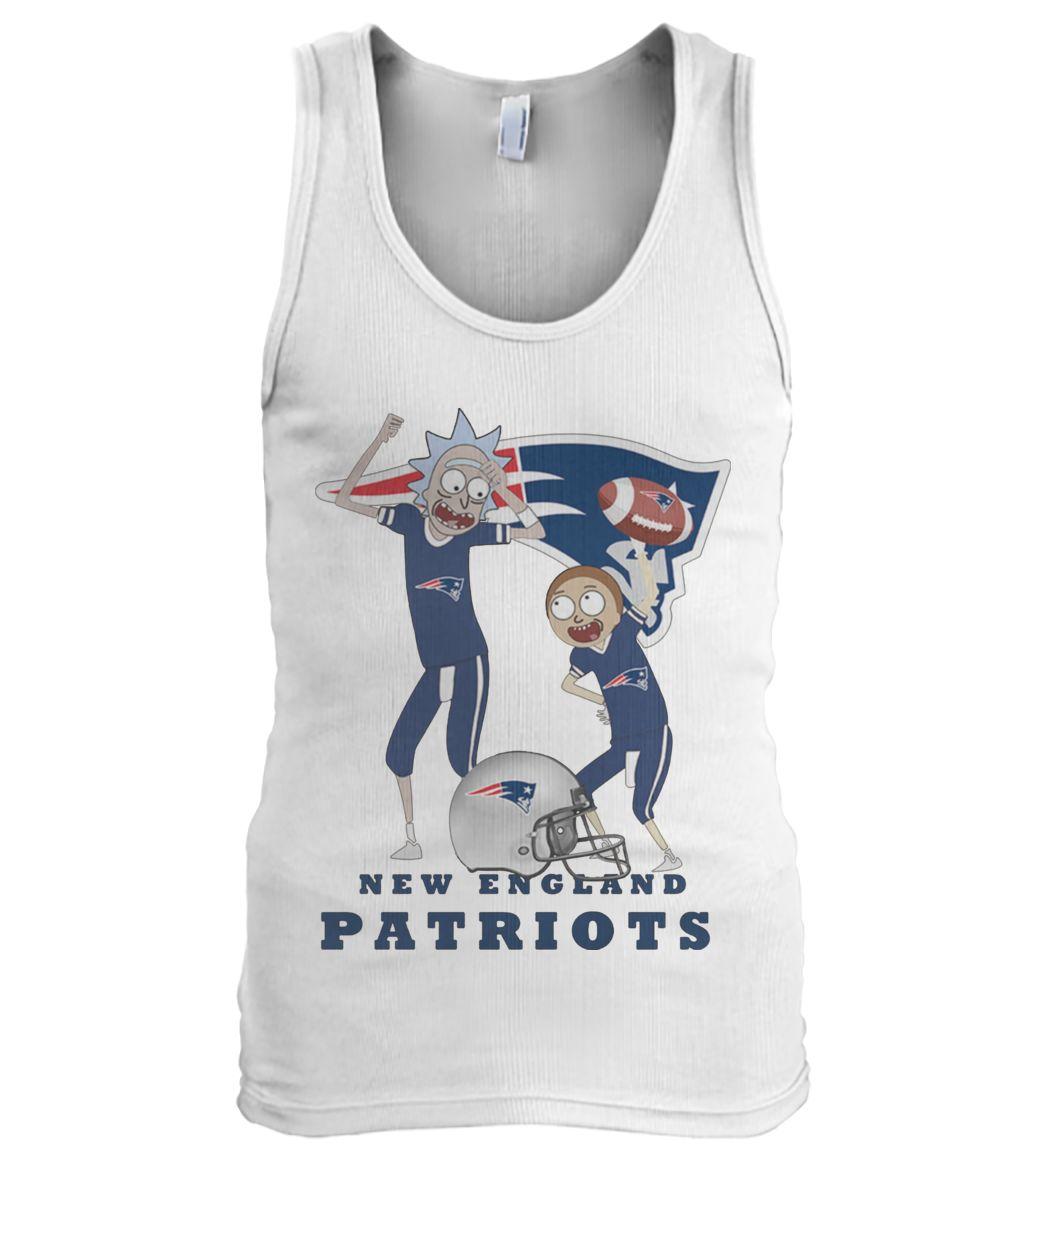 Rick and morty new england patriots tank top